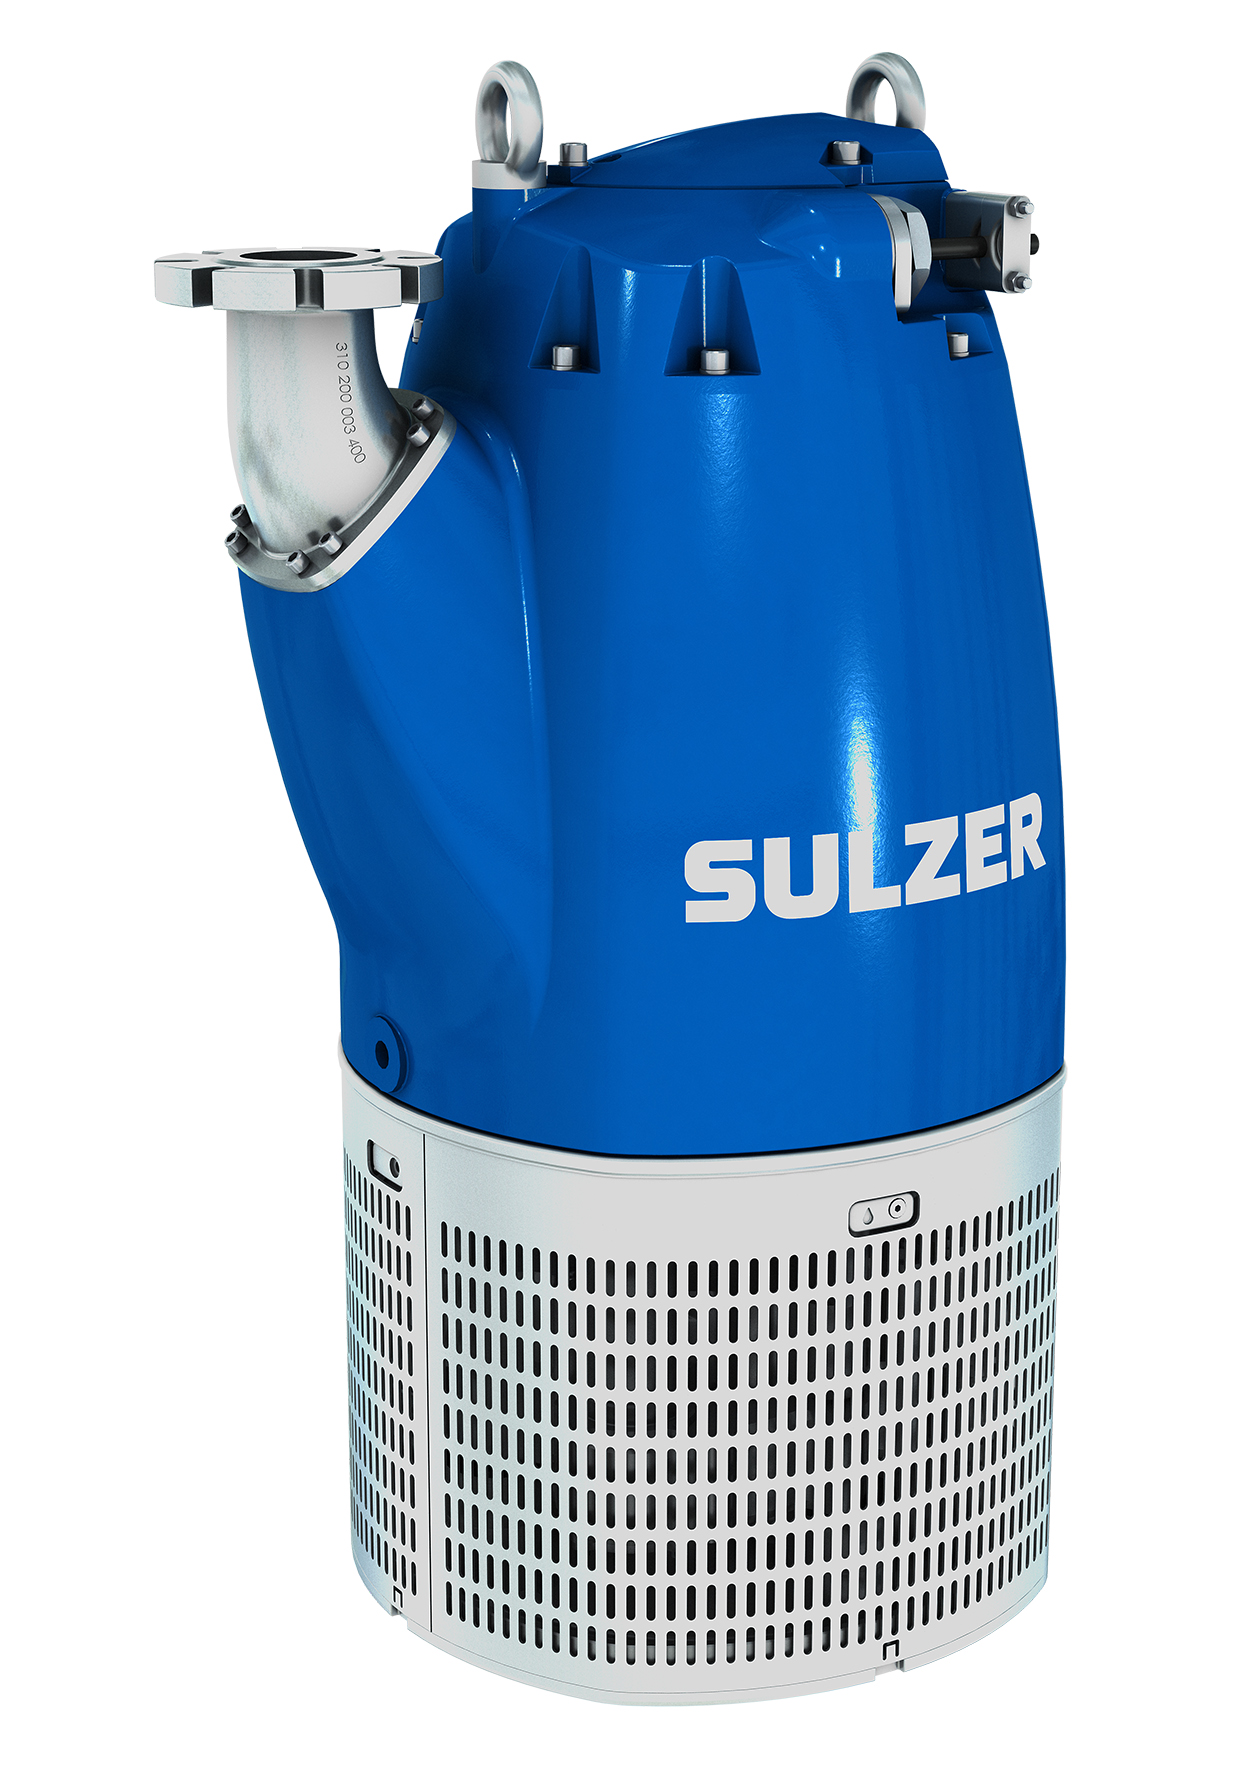 Sulzer’s XJ900 is a performance range extension of the XJ series introduced in 2012.